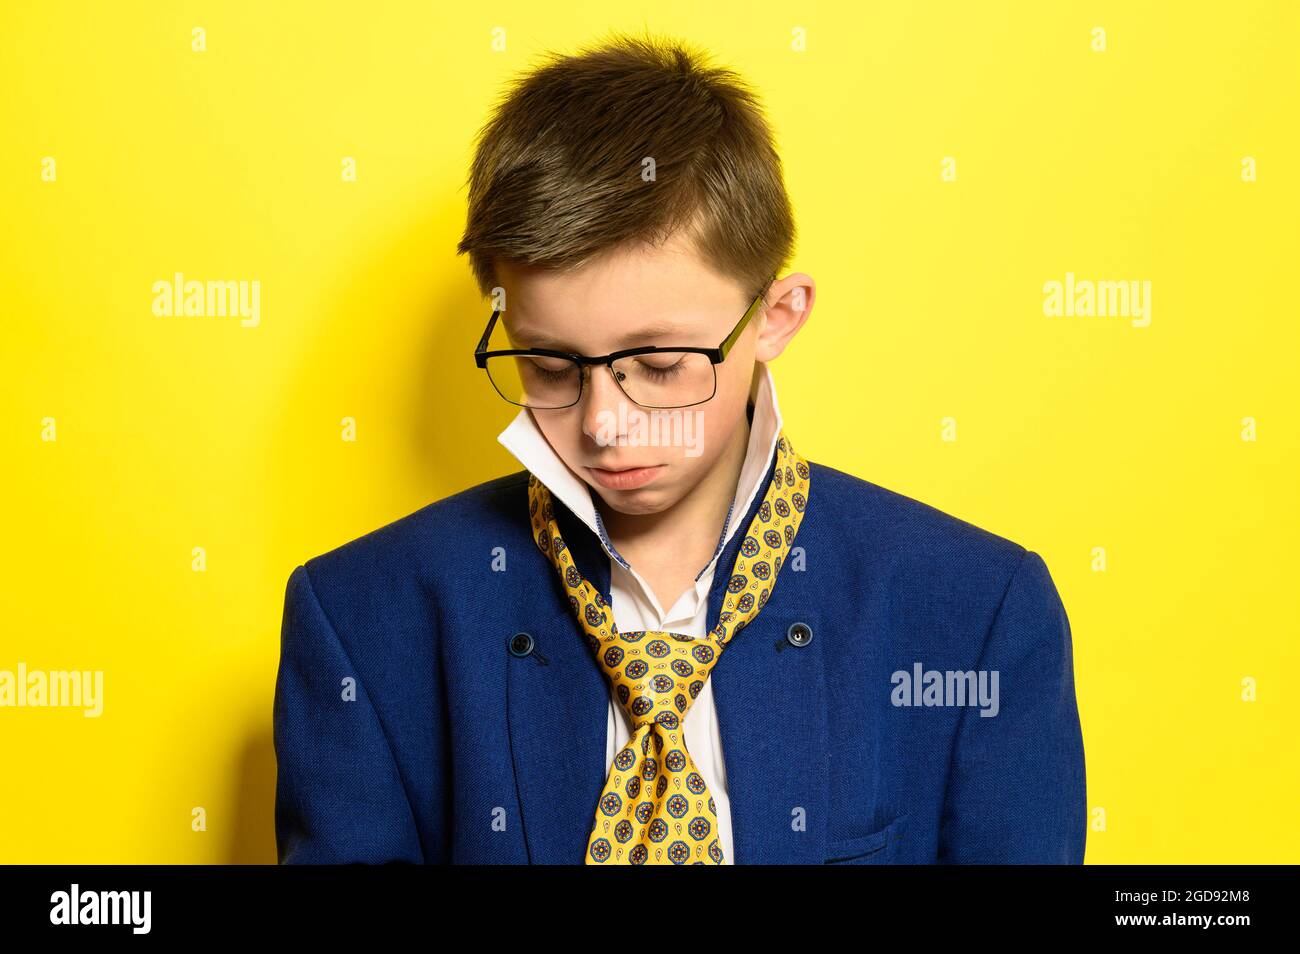 Portrait of a boy on a yellow background with a sad expression, an adult suit on a child. new Stock Photo